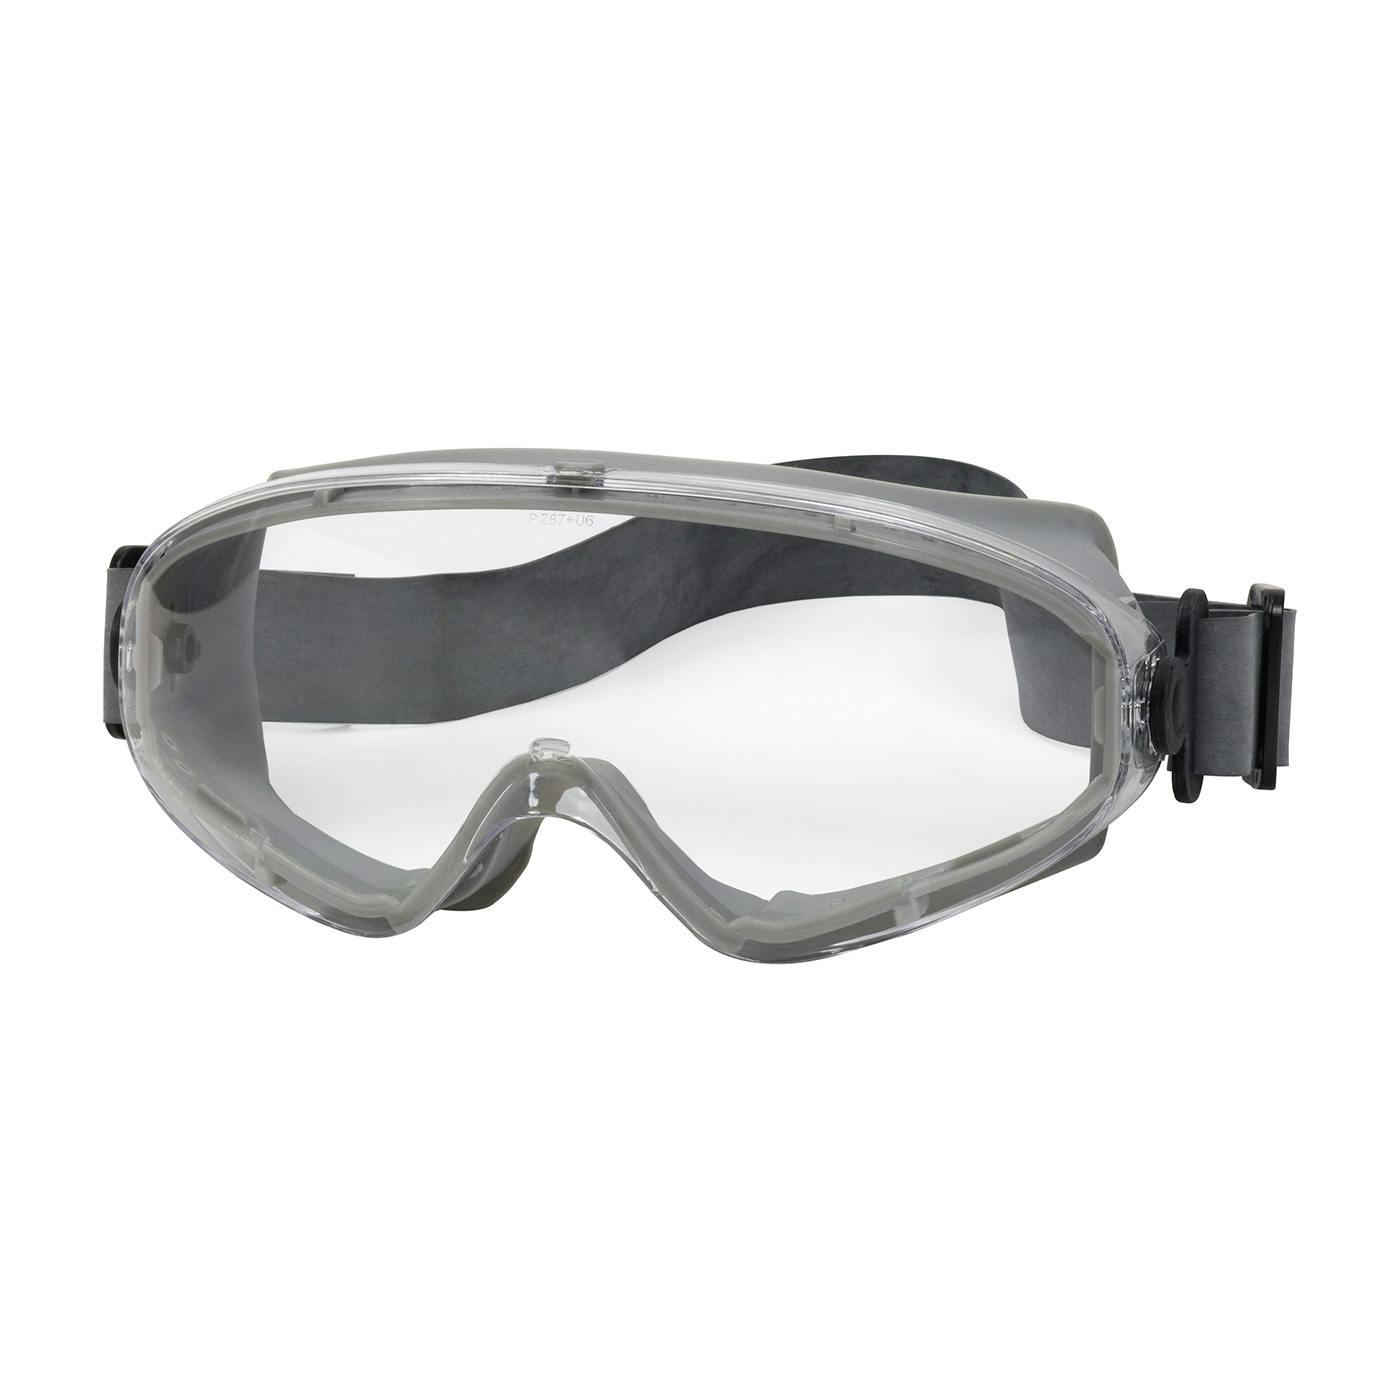 Indirect Vent Goggle with Light Gray Body, Clear Lens and Anti-Scratch / Anti-Fog Coating  - Neoprene Strap, Gray (251-80-0020-RHB) - OS